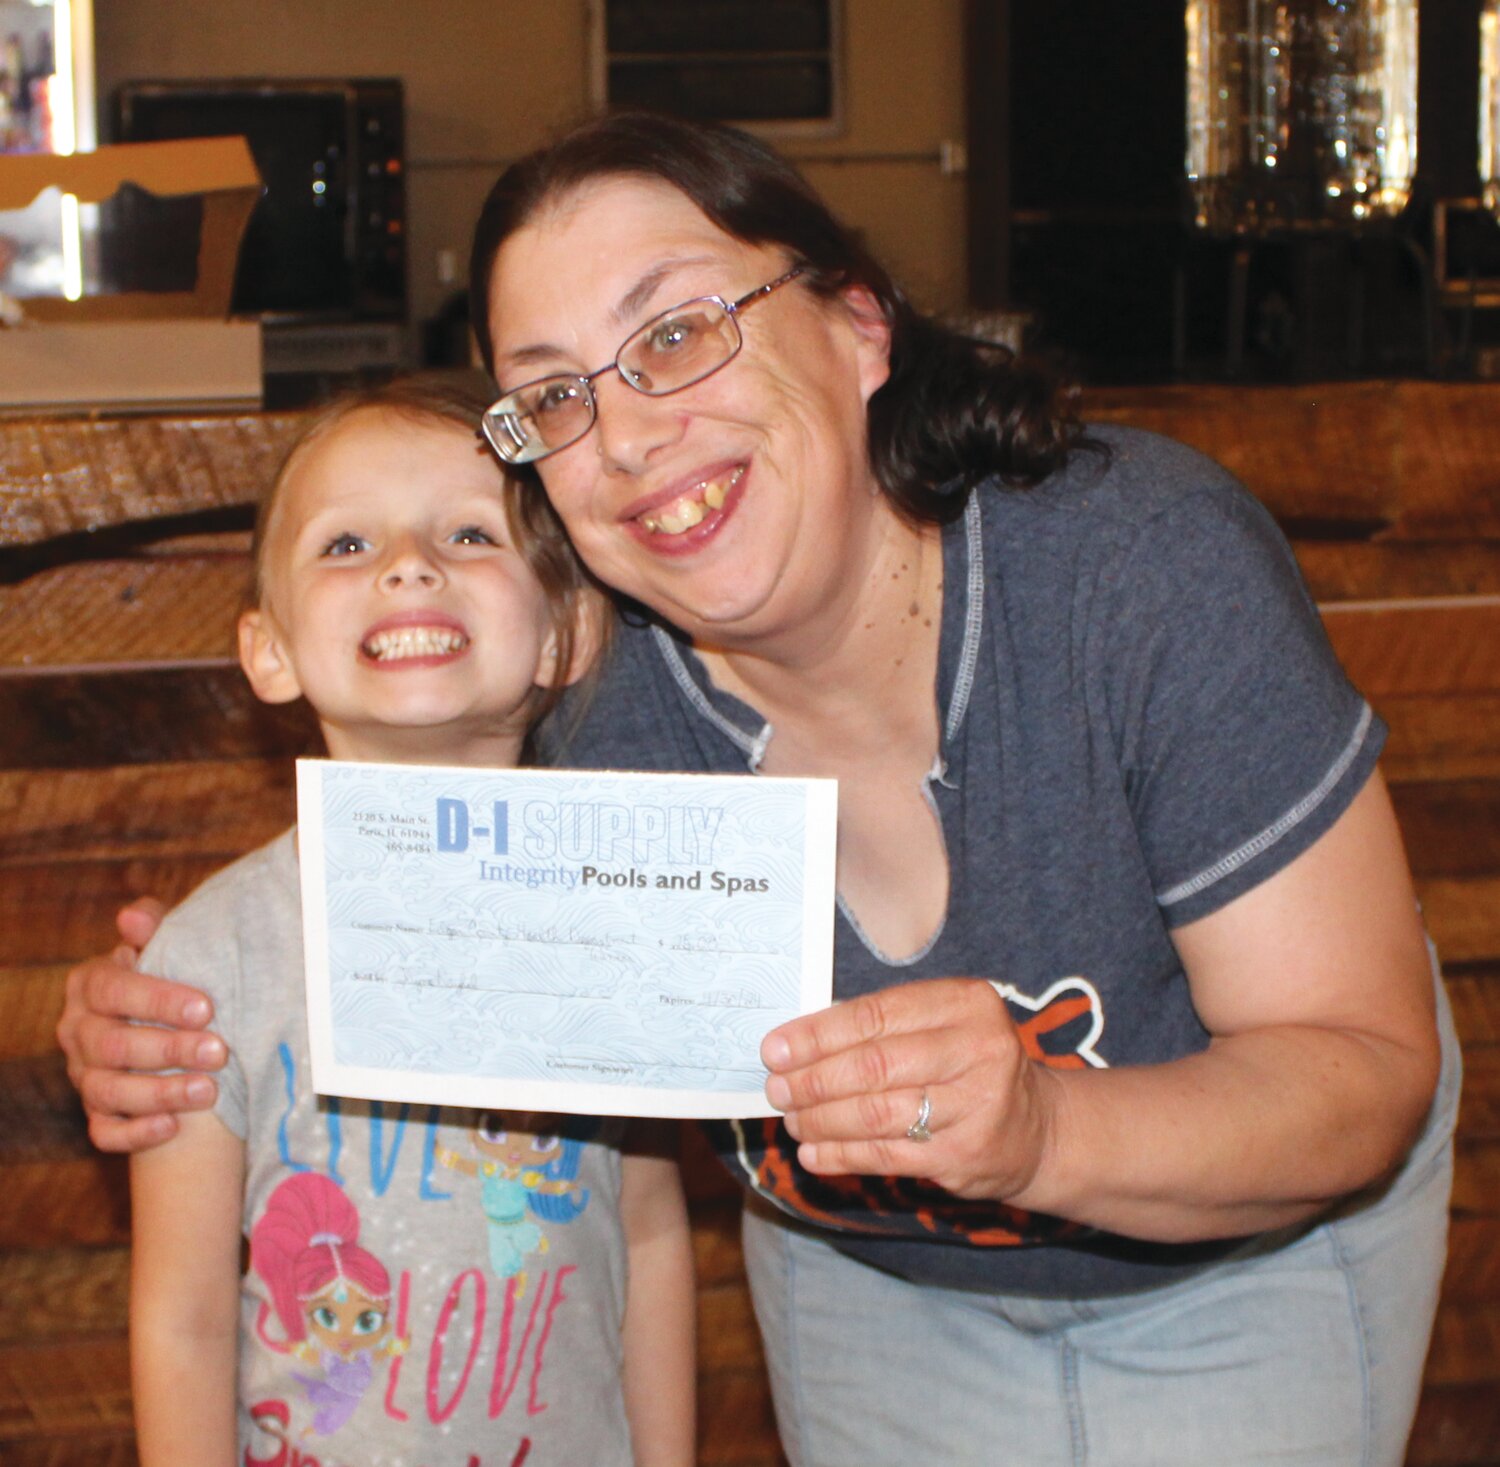 Elizabeth Garvin, 5, and her mother Robin Garvin were door prize winners at the Celebrate Families event. They received a gift certificate from D-I Supply.